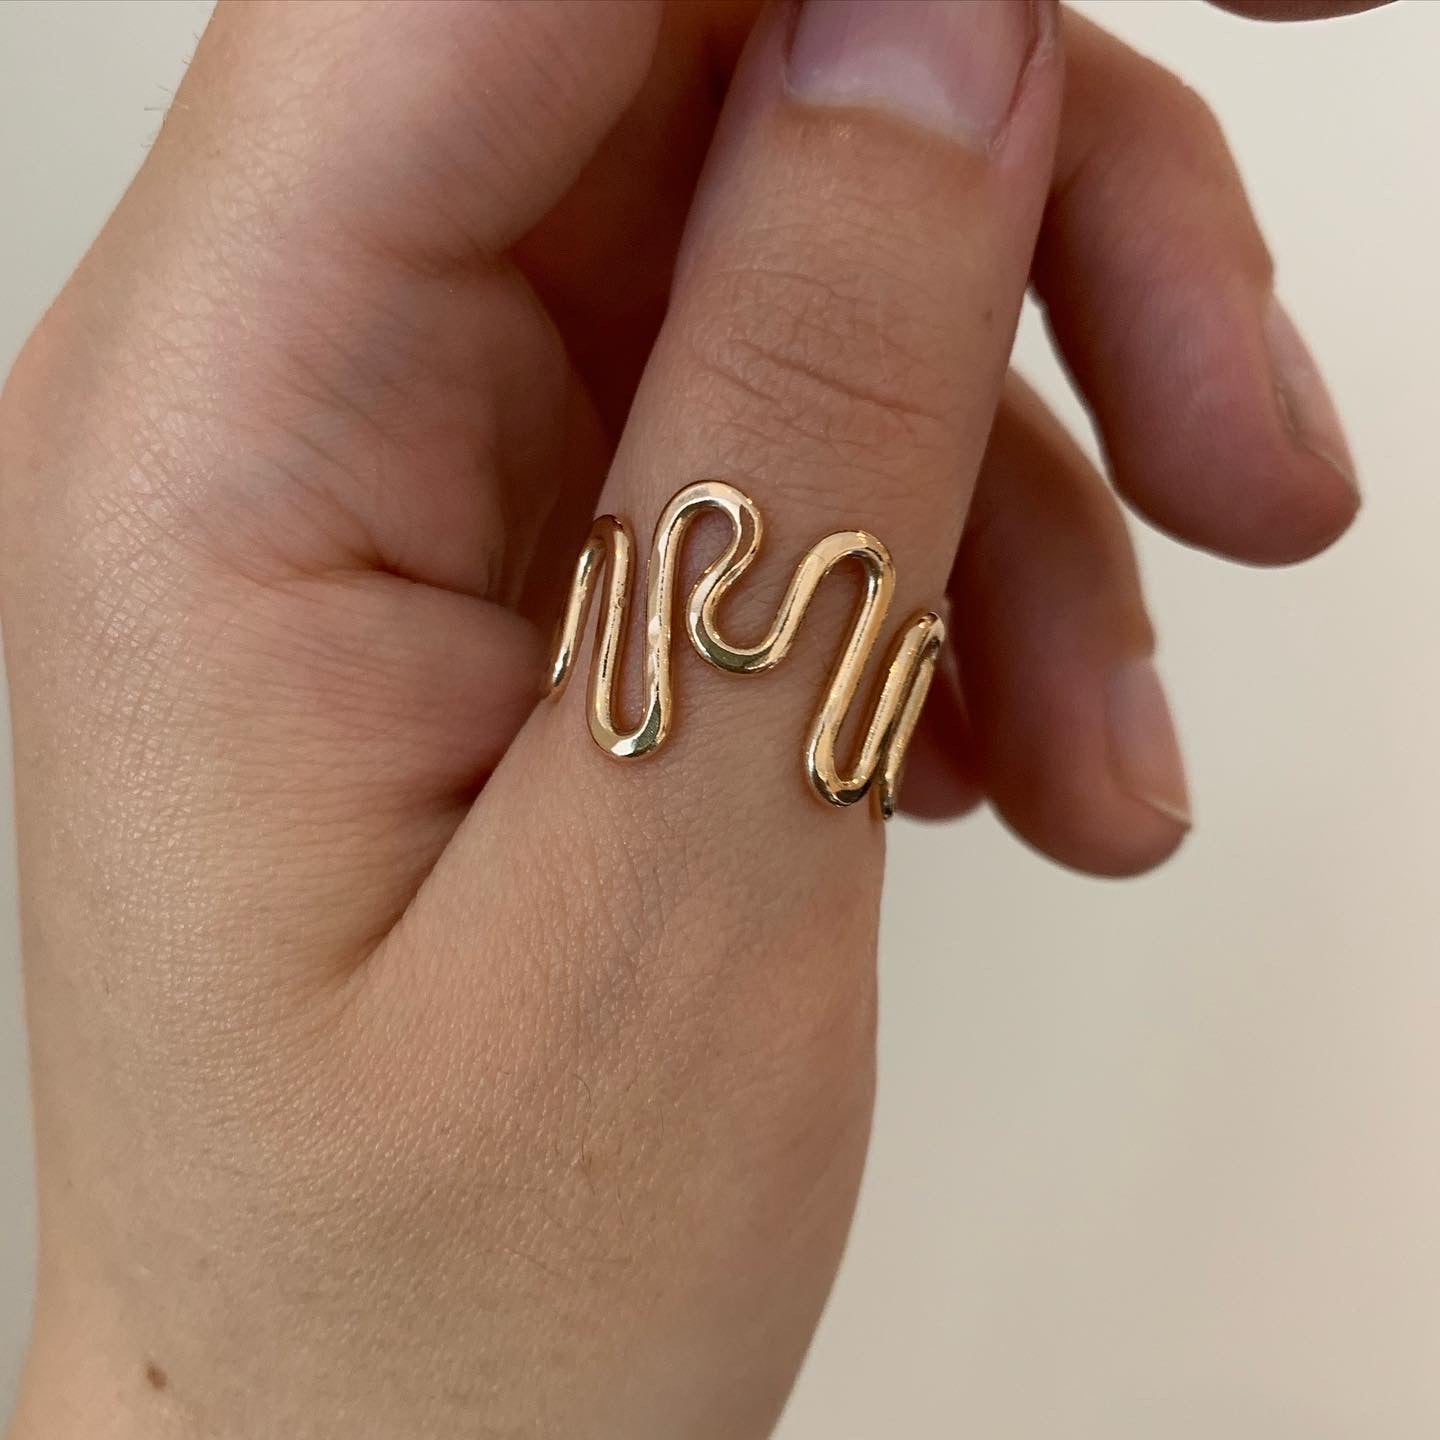 A gold-filled ripple ring pictured on a hand.